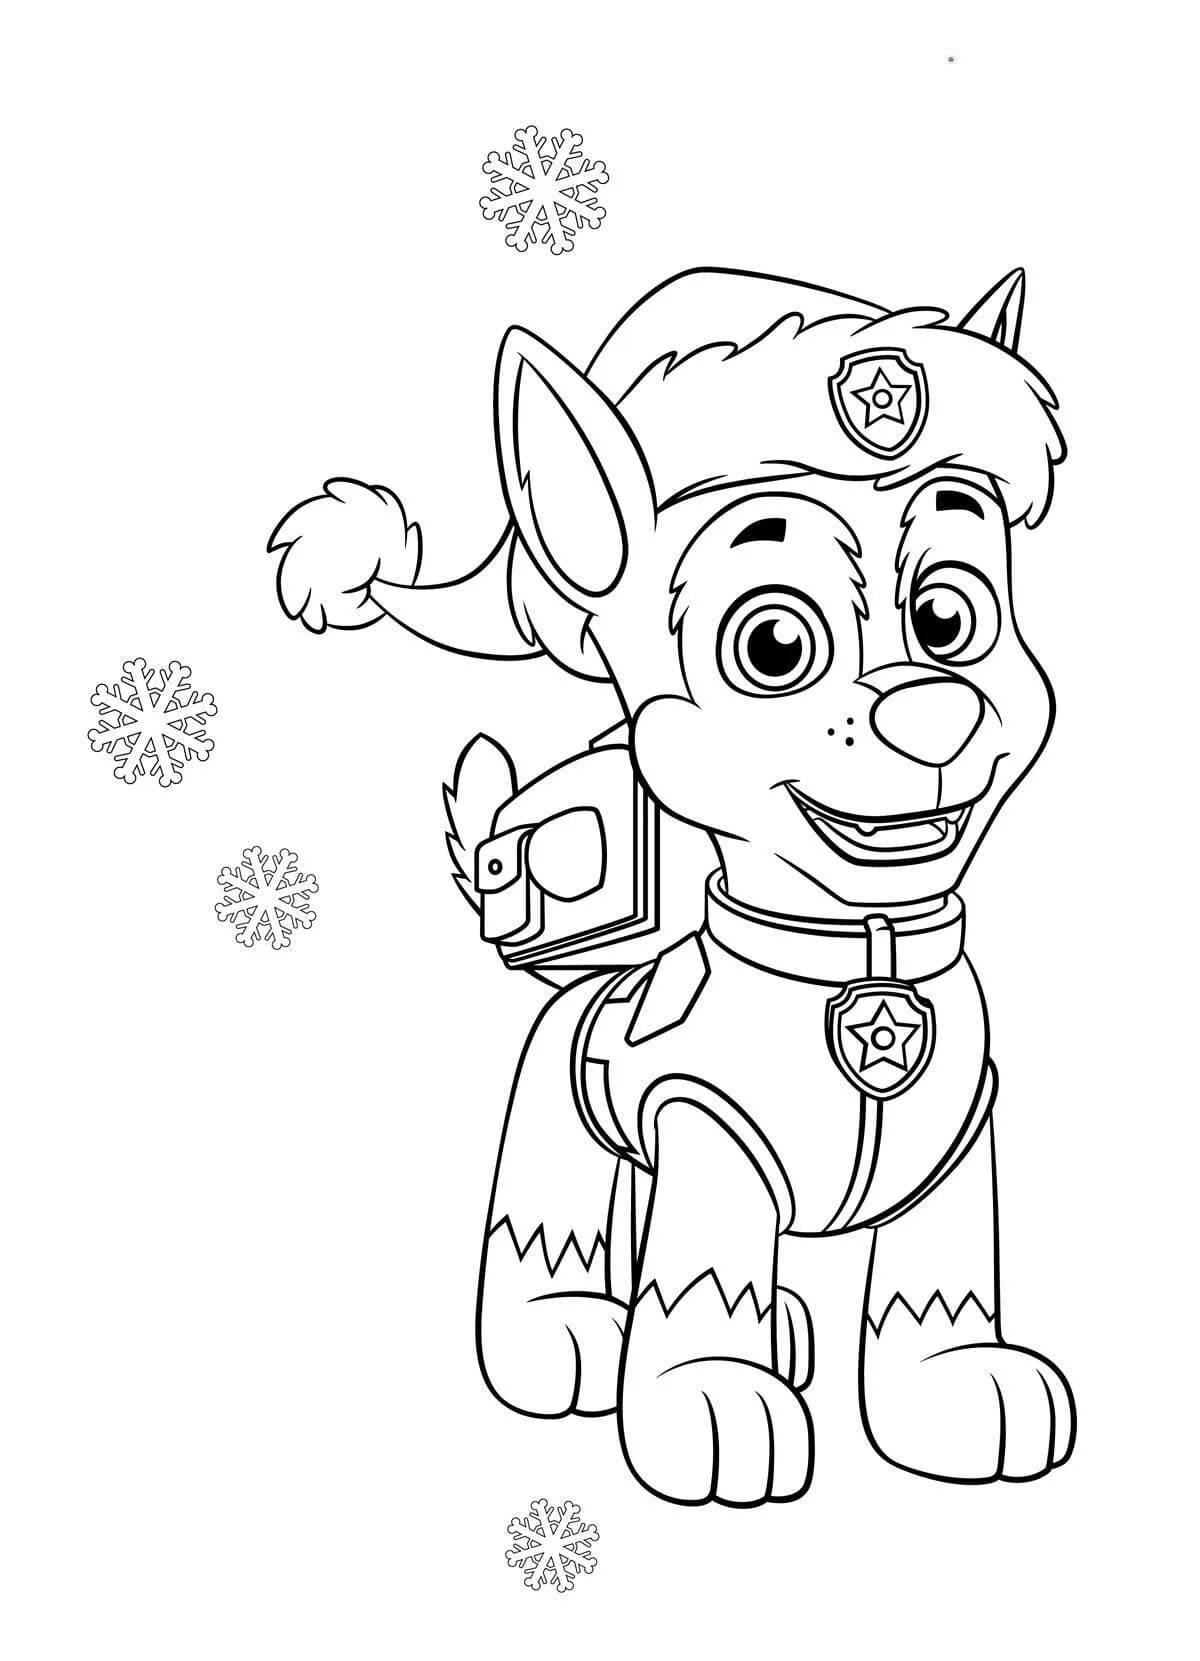 Coloring page playful marshal and racer